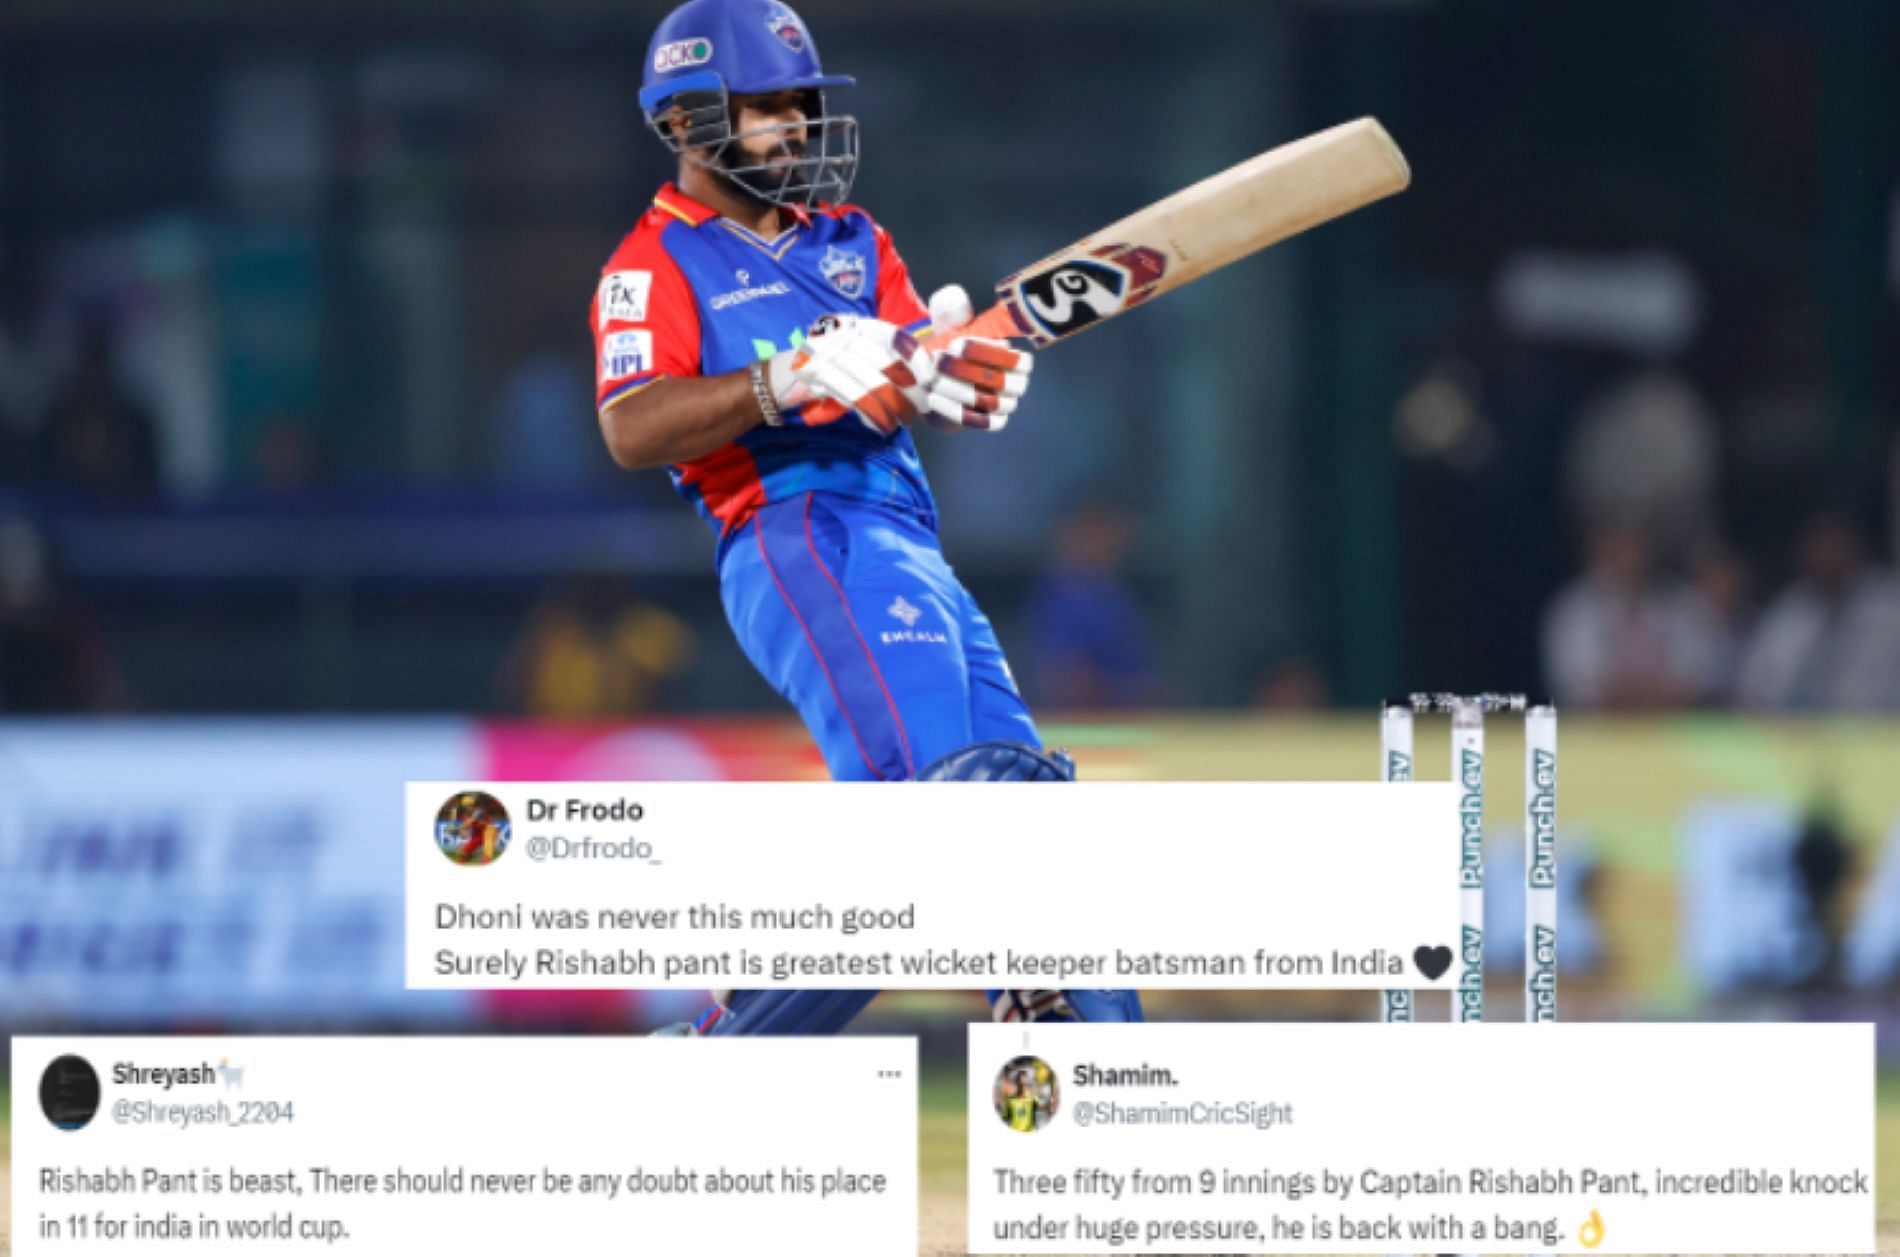 Pant thrilled the Delhi fans with a batting masterclass [Credtit: IPL Twitter handle]